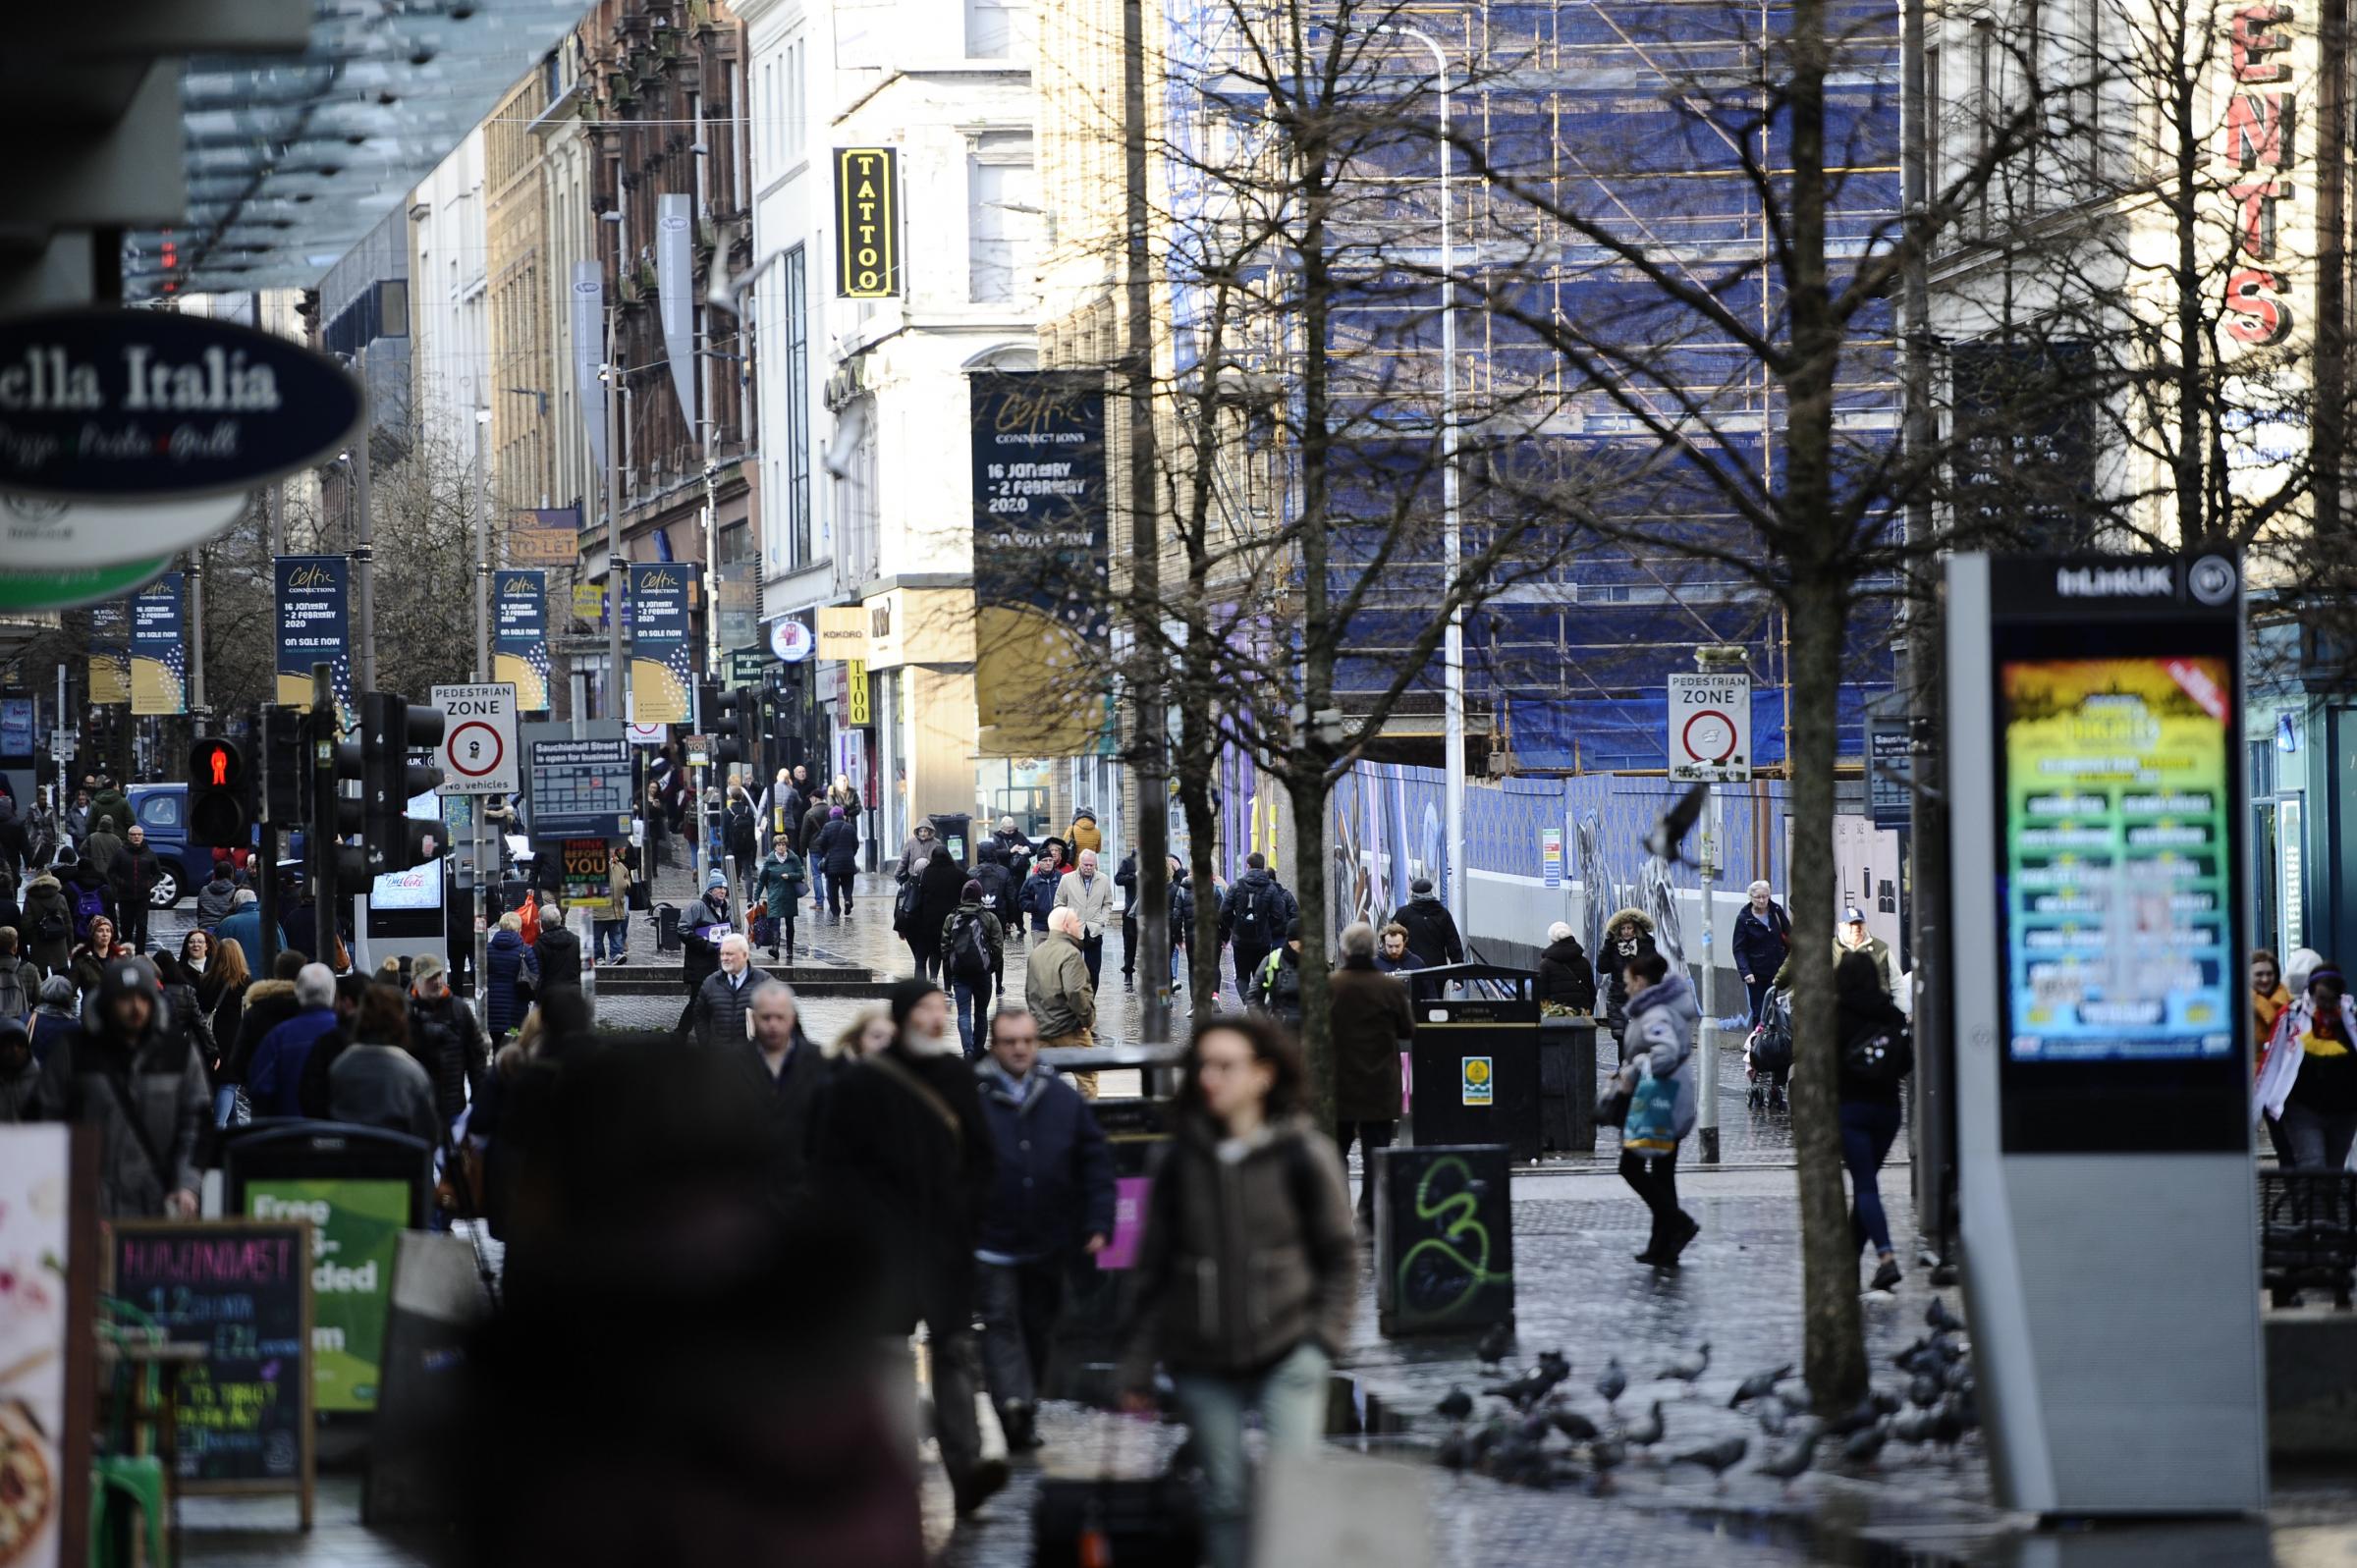 Footfall has been slow to return for cities and Glasgow in particular